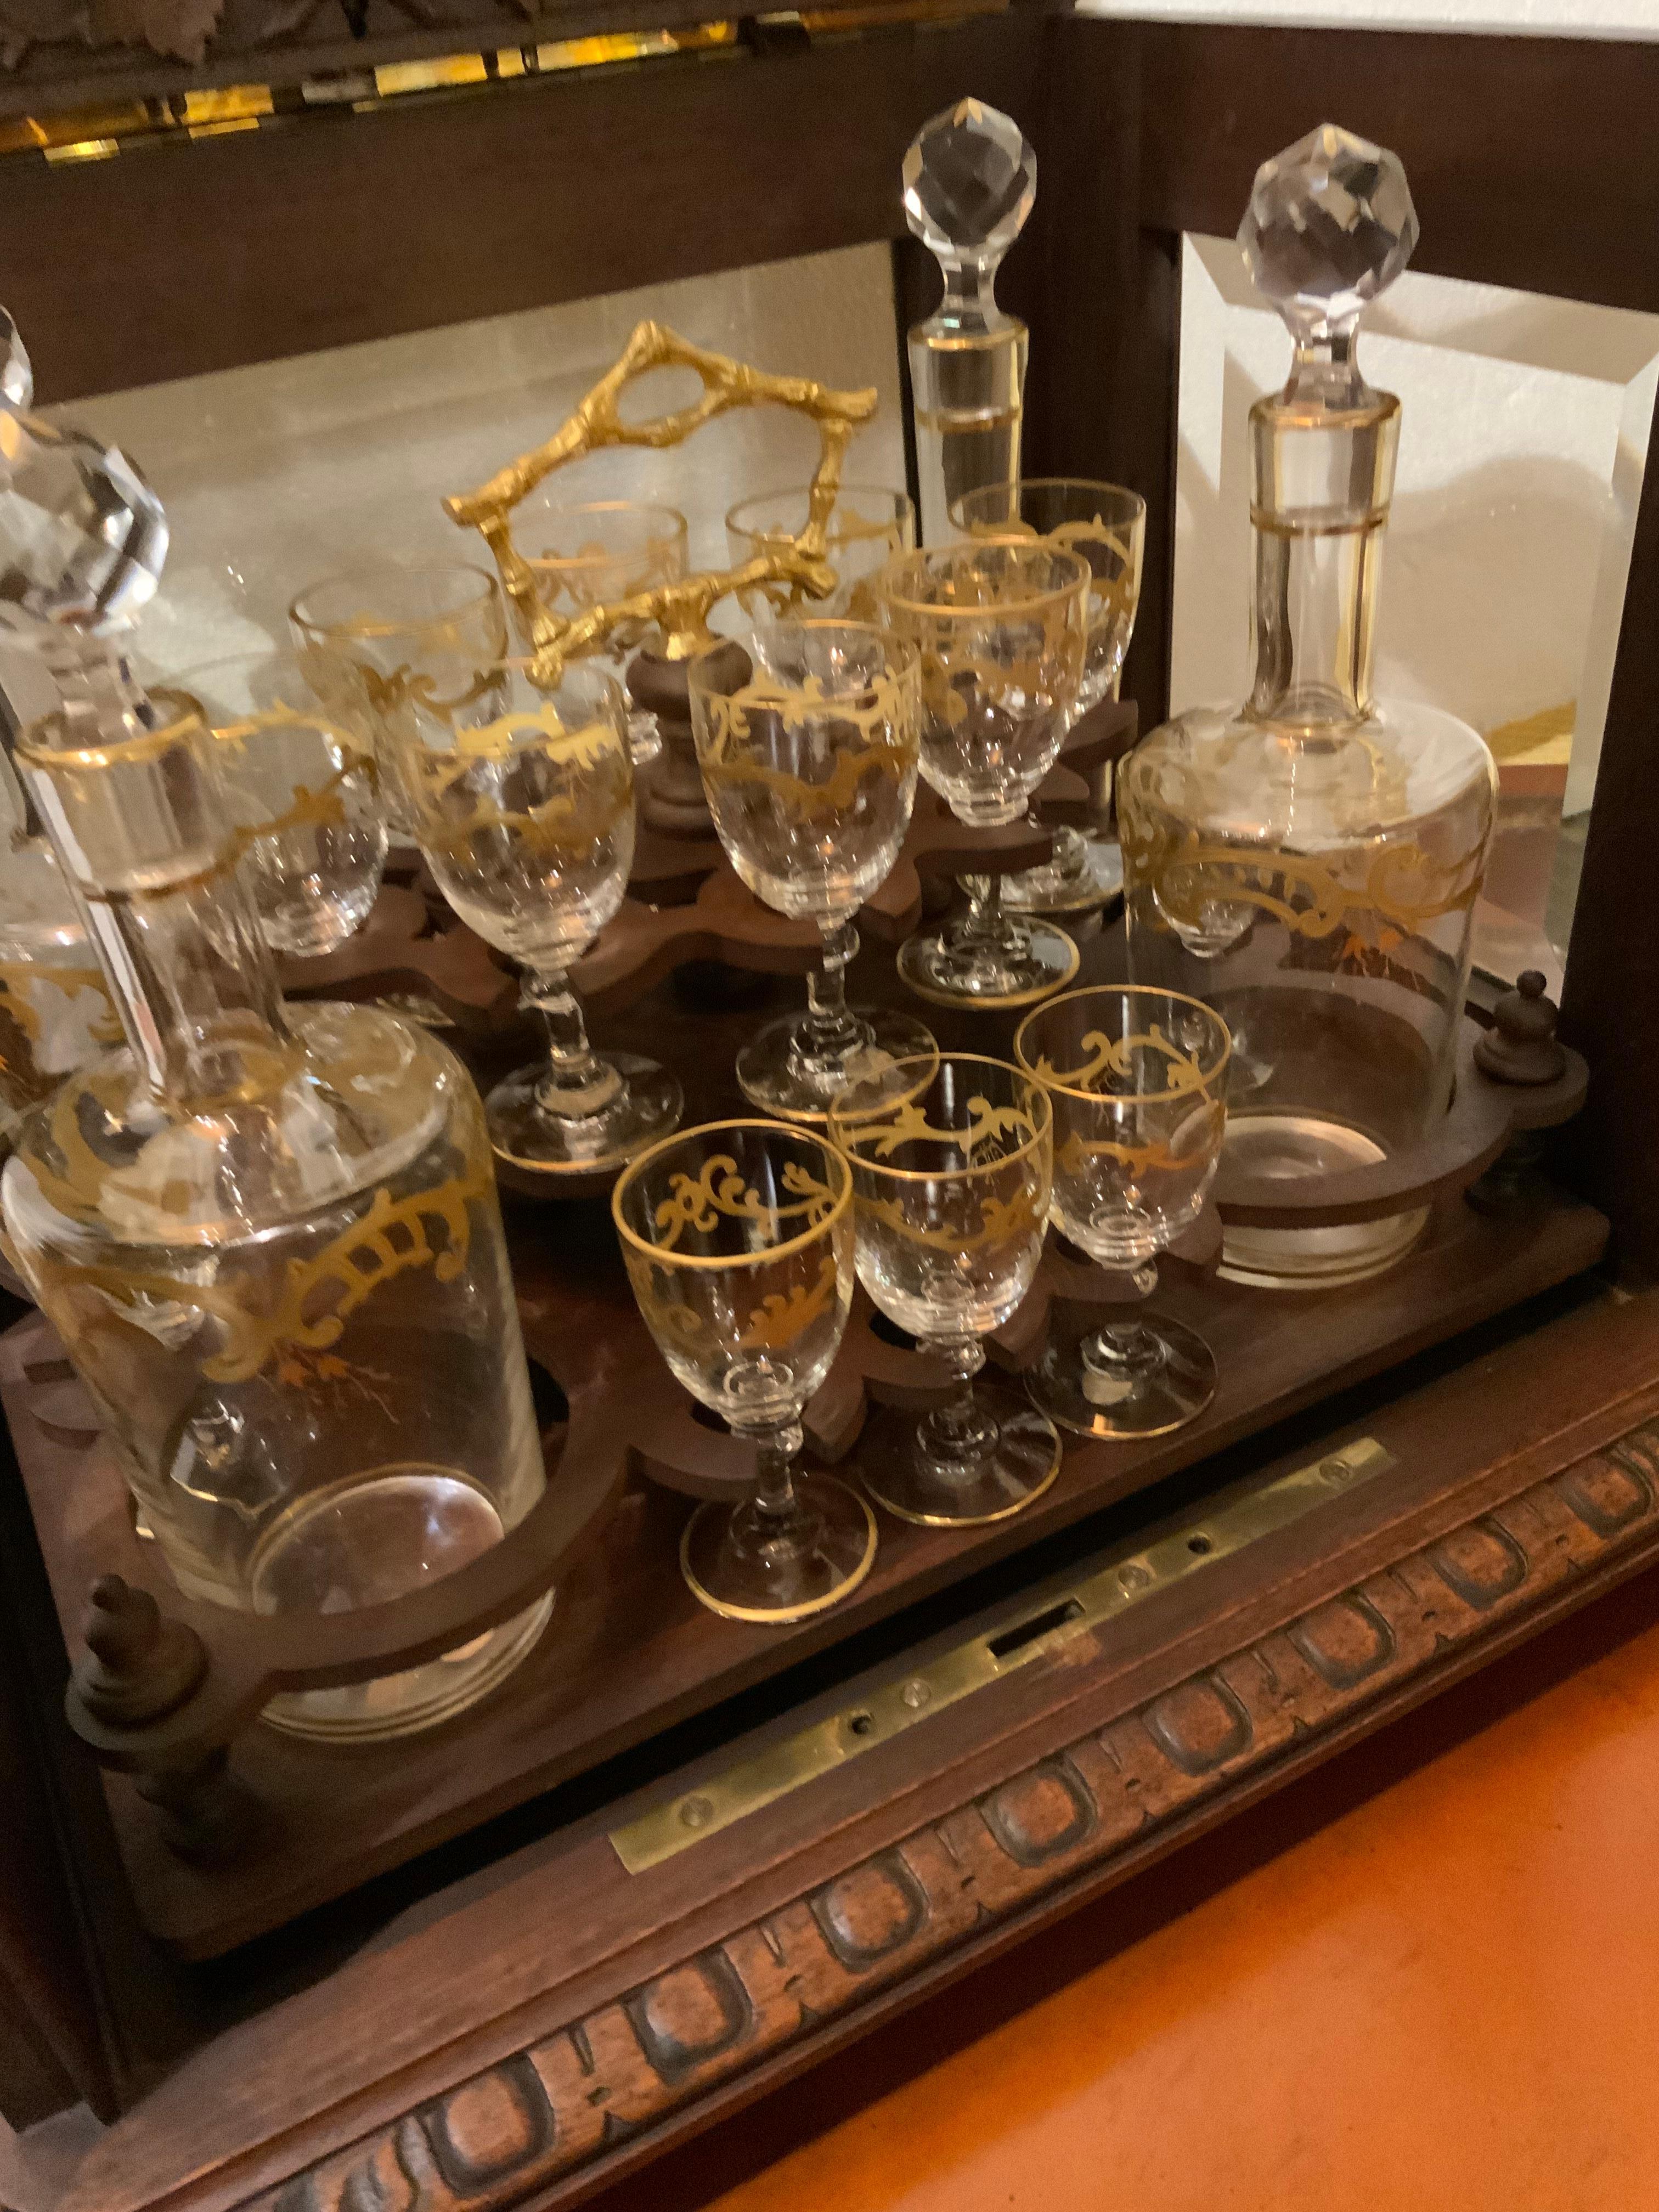 This cave a liqueur set is truly special because the box is exquisitely 
Carved and has the original beveled glass. The decanters and stem
Ware are by St. Louis and the original label is attached on the bottom 
Of the decanters. The stems are